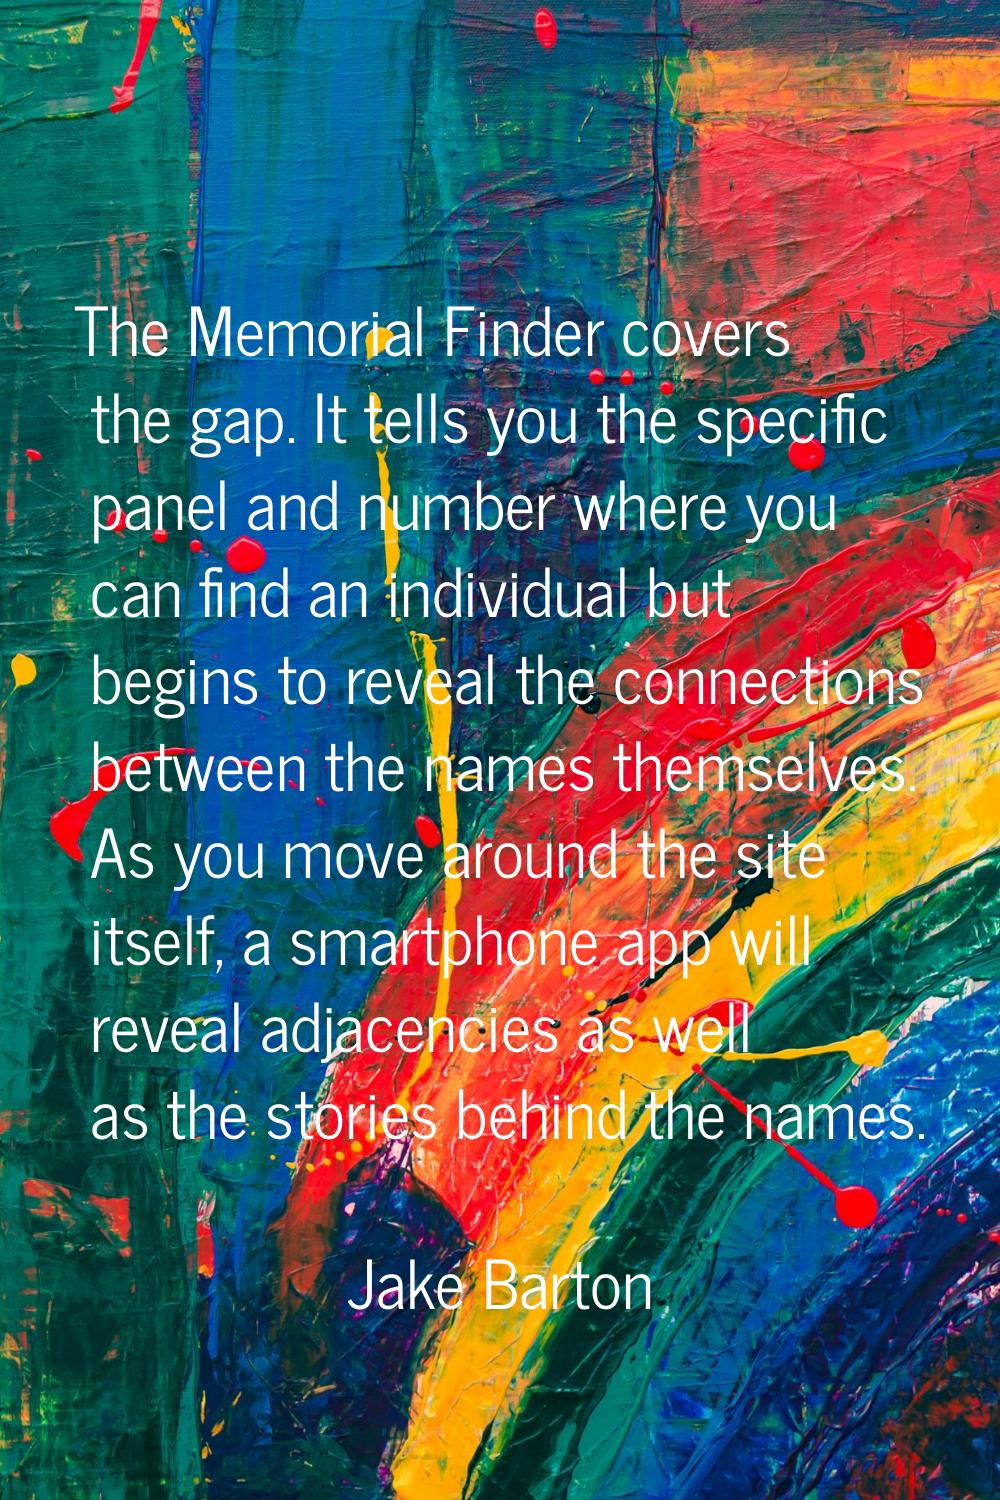 The Memorial Finder covers the gap. It tells you the specific panel and number where you can find a